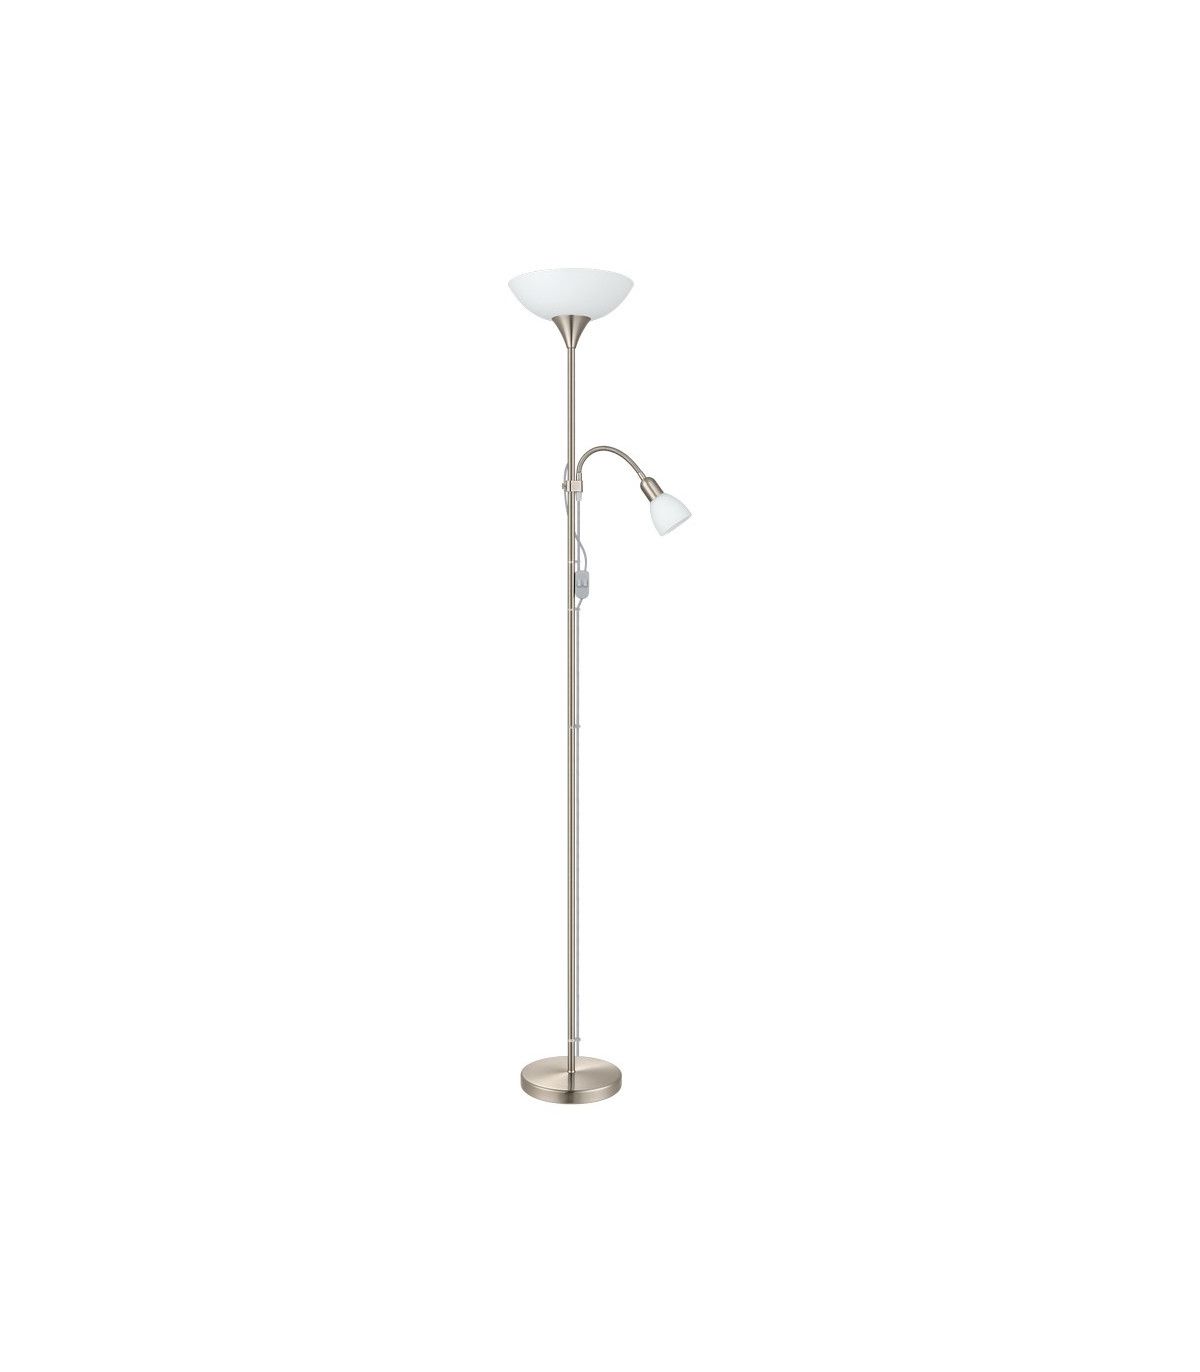 Up 2 Light Traditional Adjustable Floor Lamp Satin Nickel And White Frosted  Glass With Switch | Netlighting.co.uk In Glass Satin Nickel Floor Lamps (Photo 15 of 15)